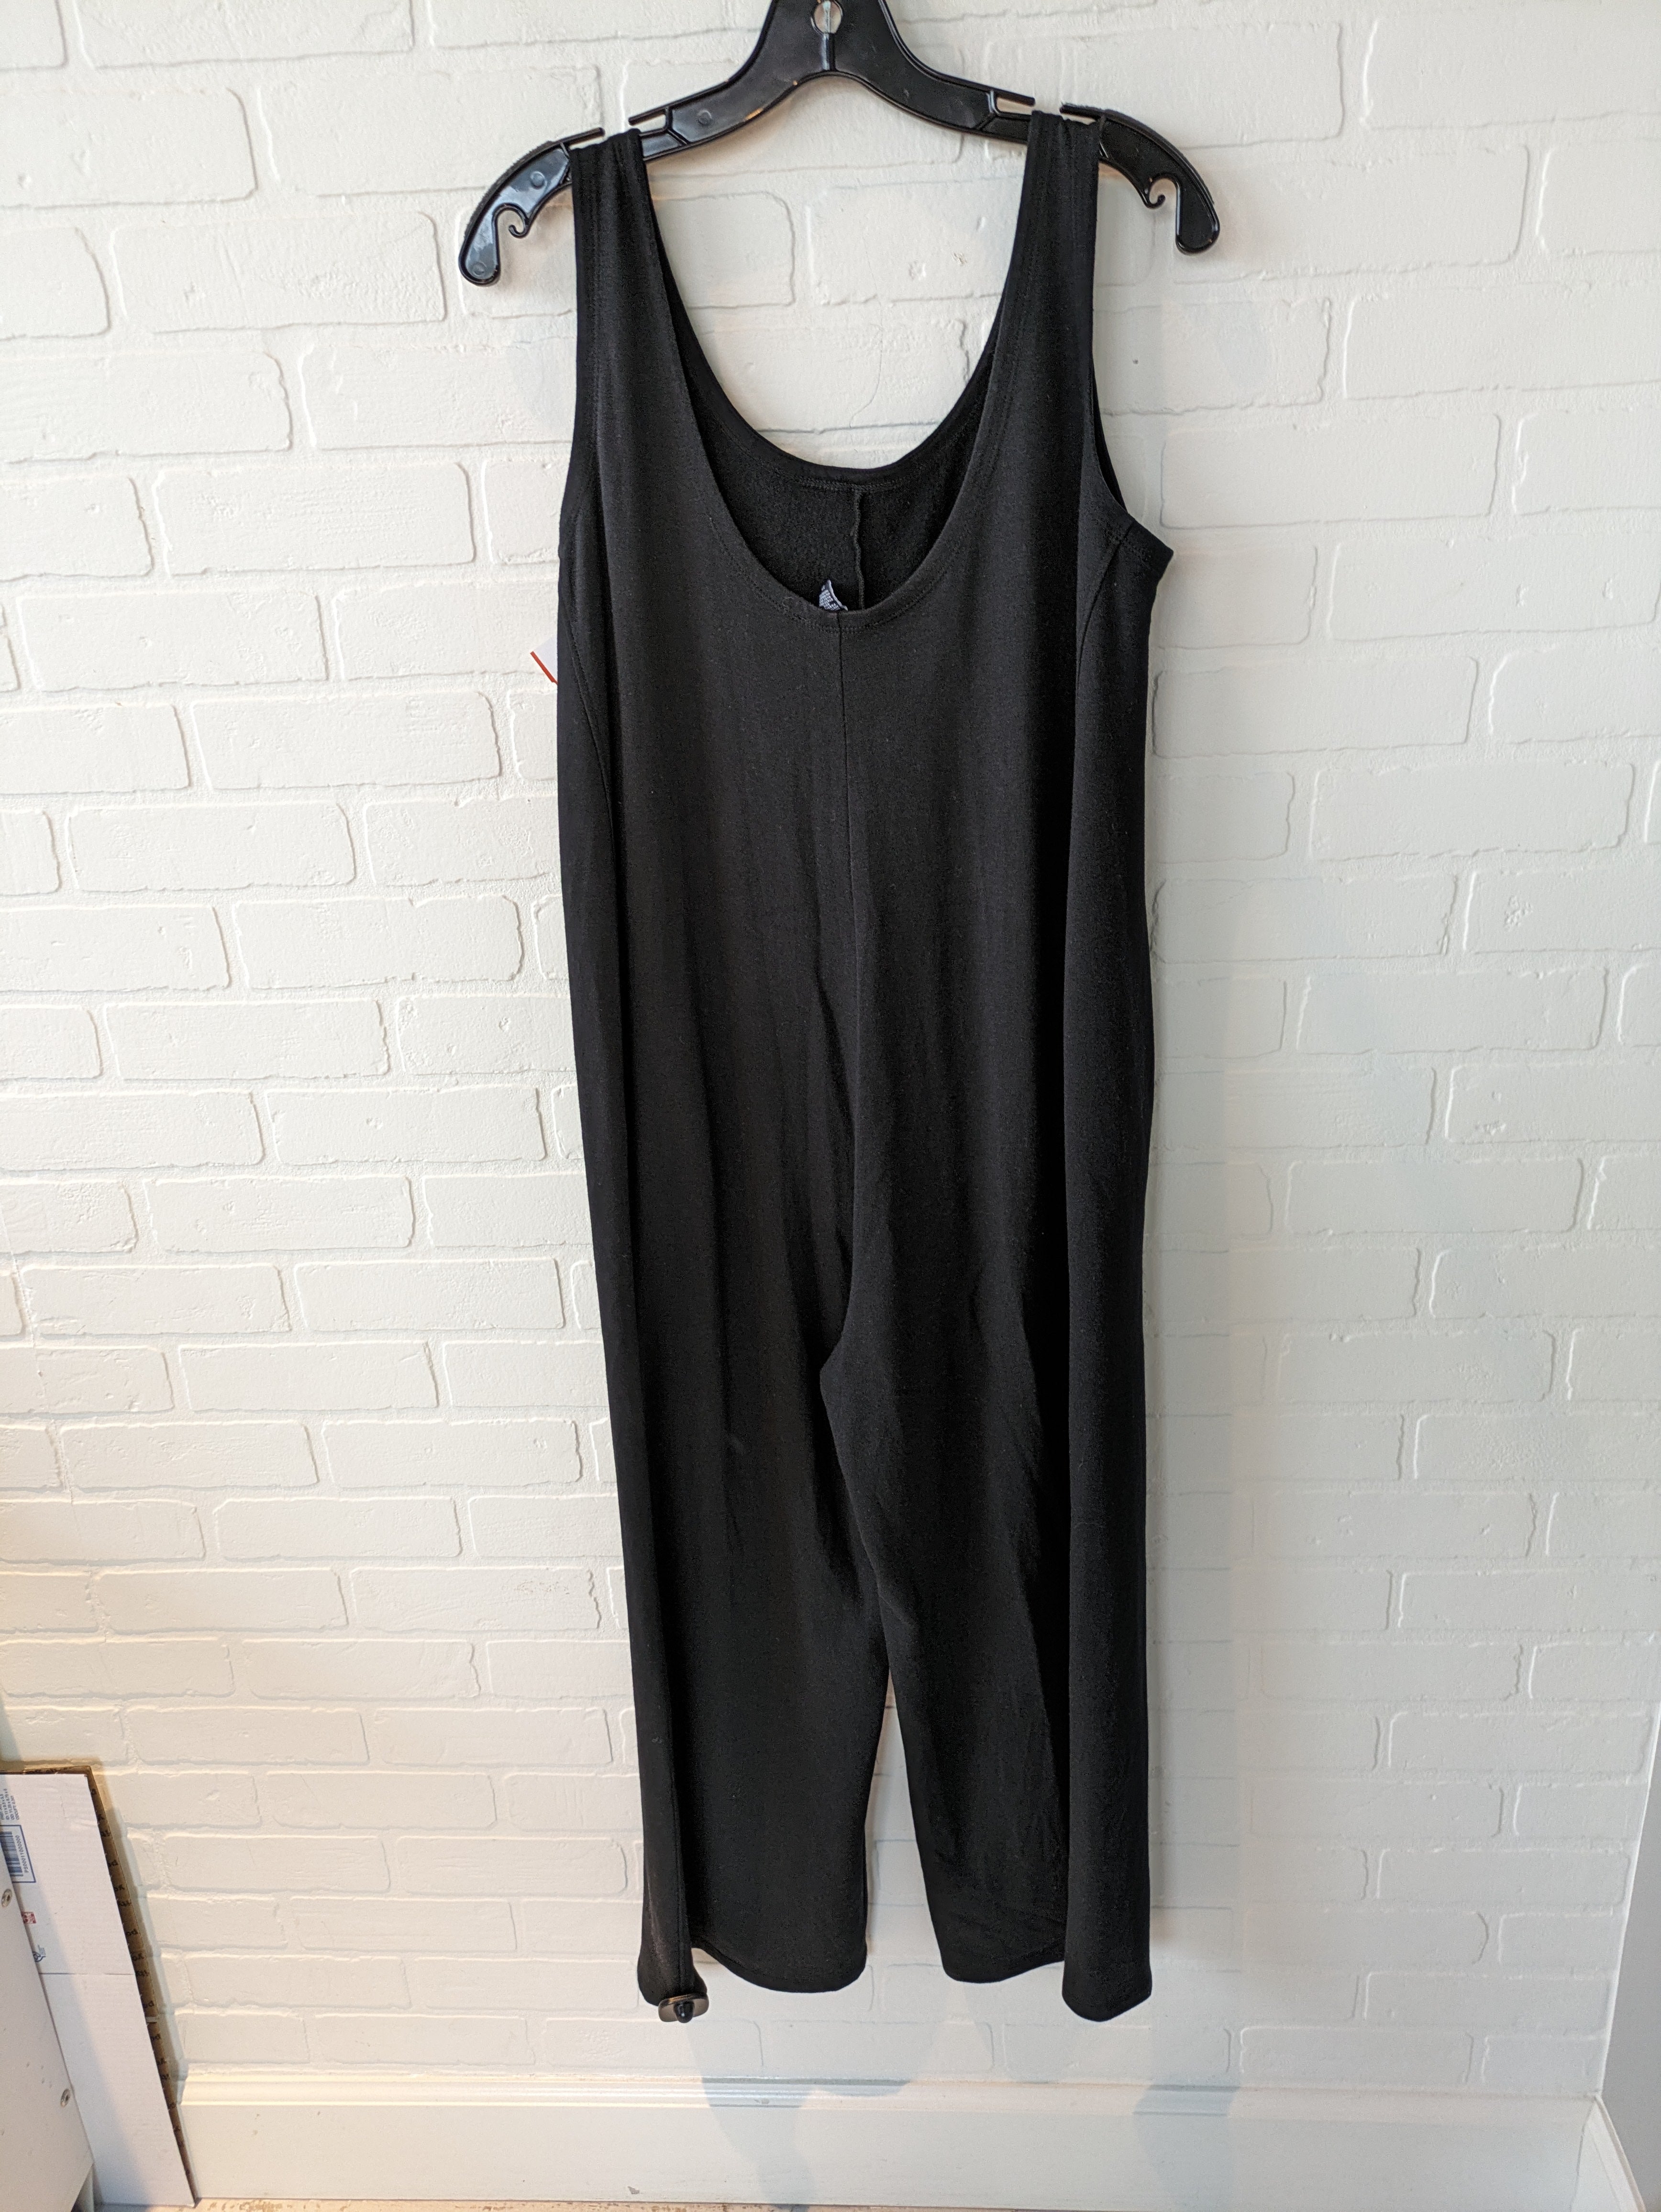 EILEEN FISHER - A jumpsuit that looks like a dress in a textural knit with  the perfect combination of sophistication and stretch. bit.ly/2OcomEV |  Facebook